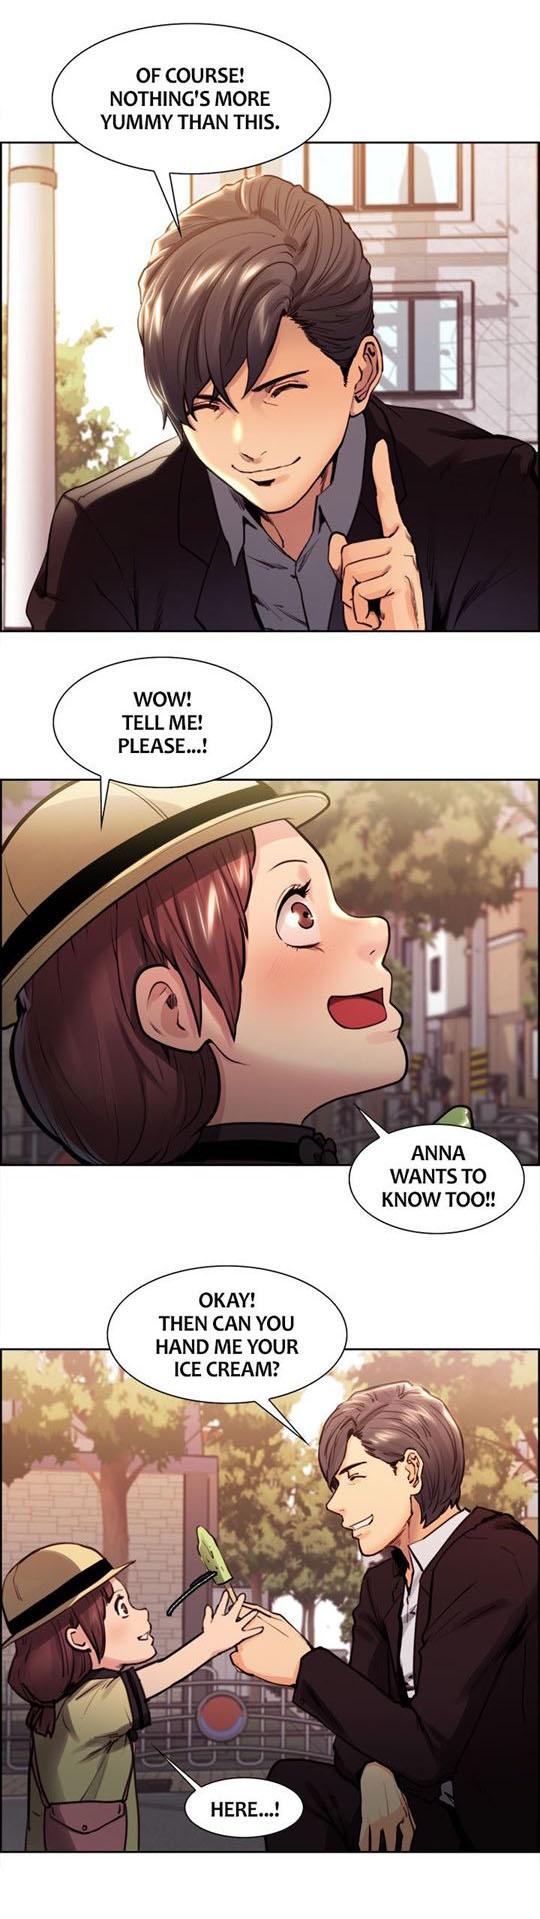 Show Taste of Forbbiden Fruit Ch.15/24 Tits - Page 10